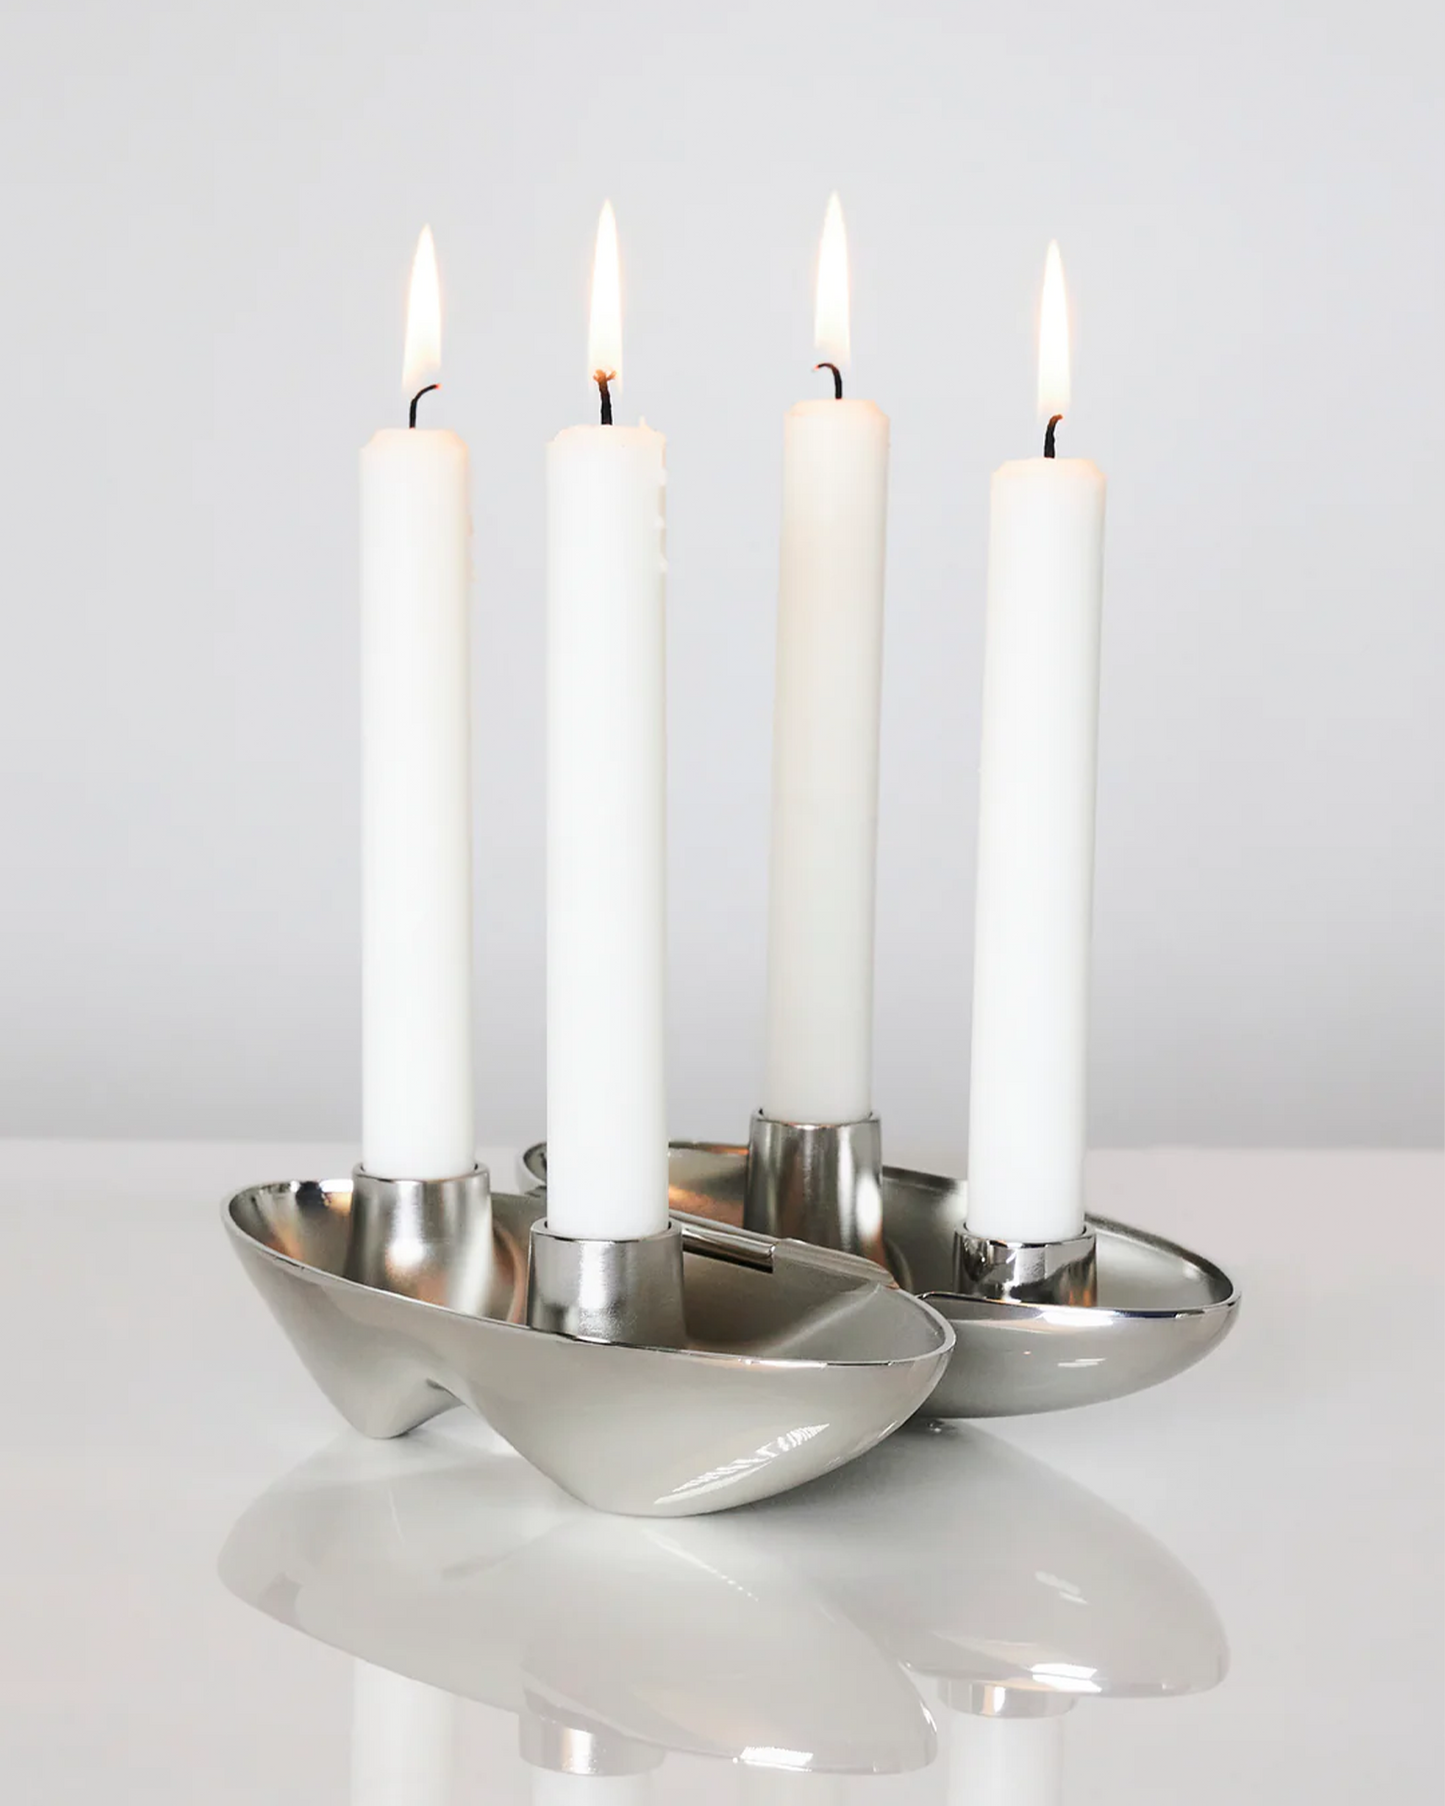 PUBLISHED BY FOUR CANDLE HOLDER